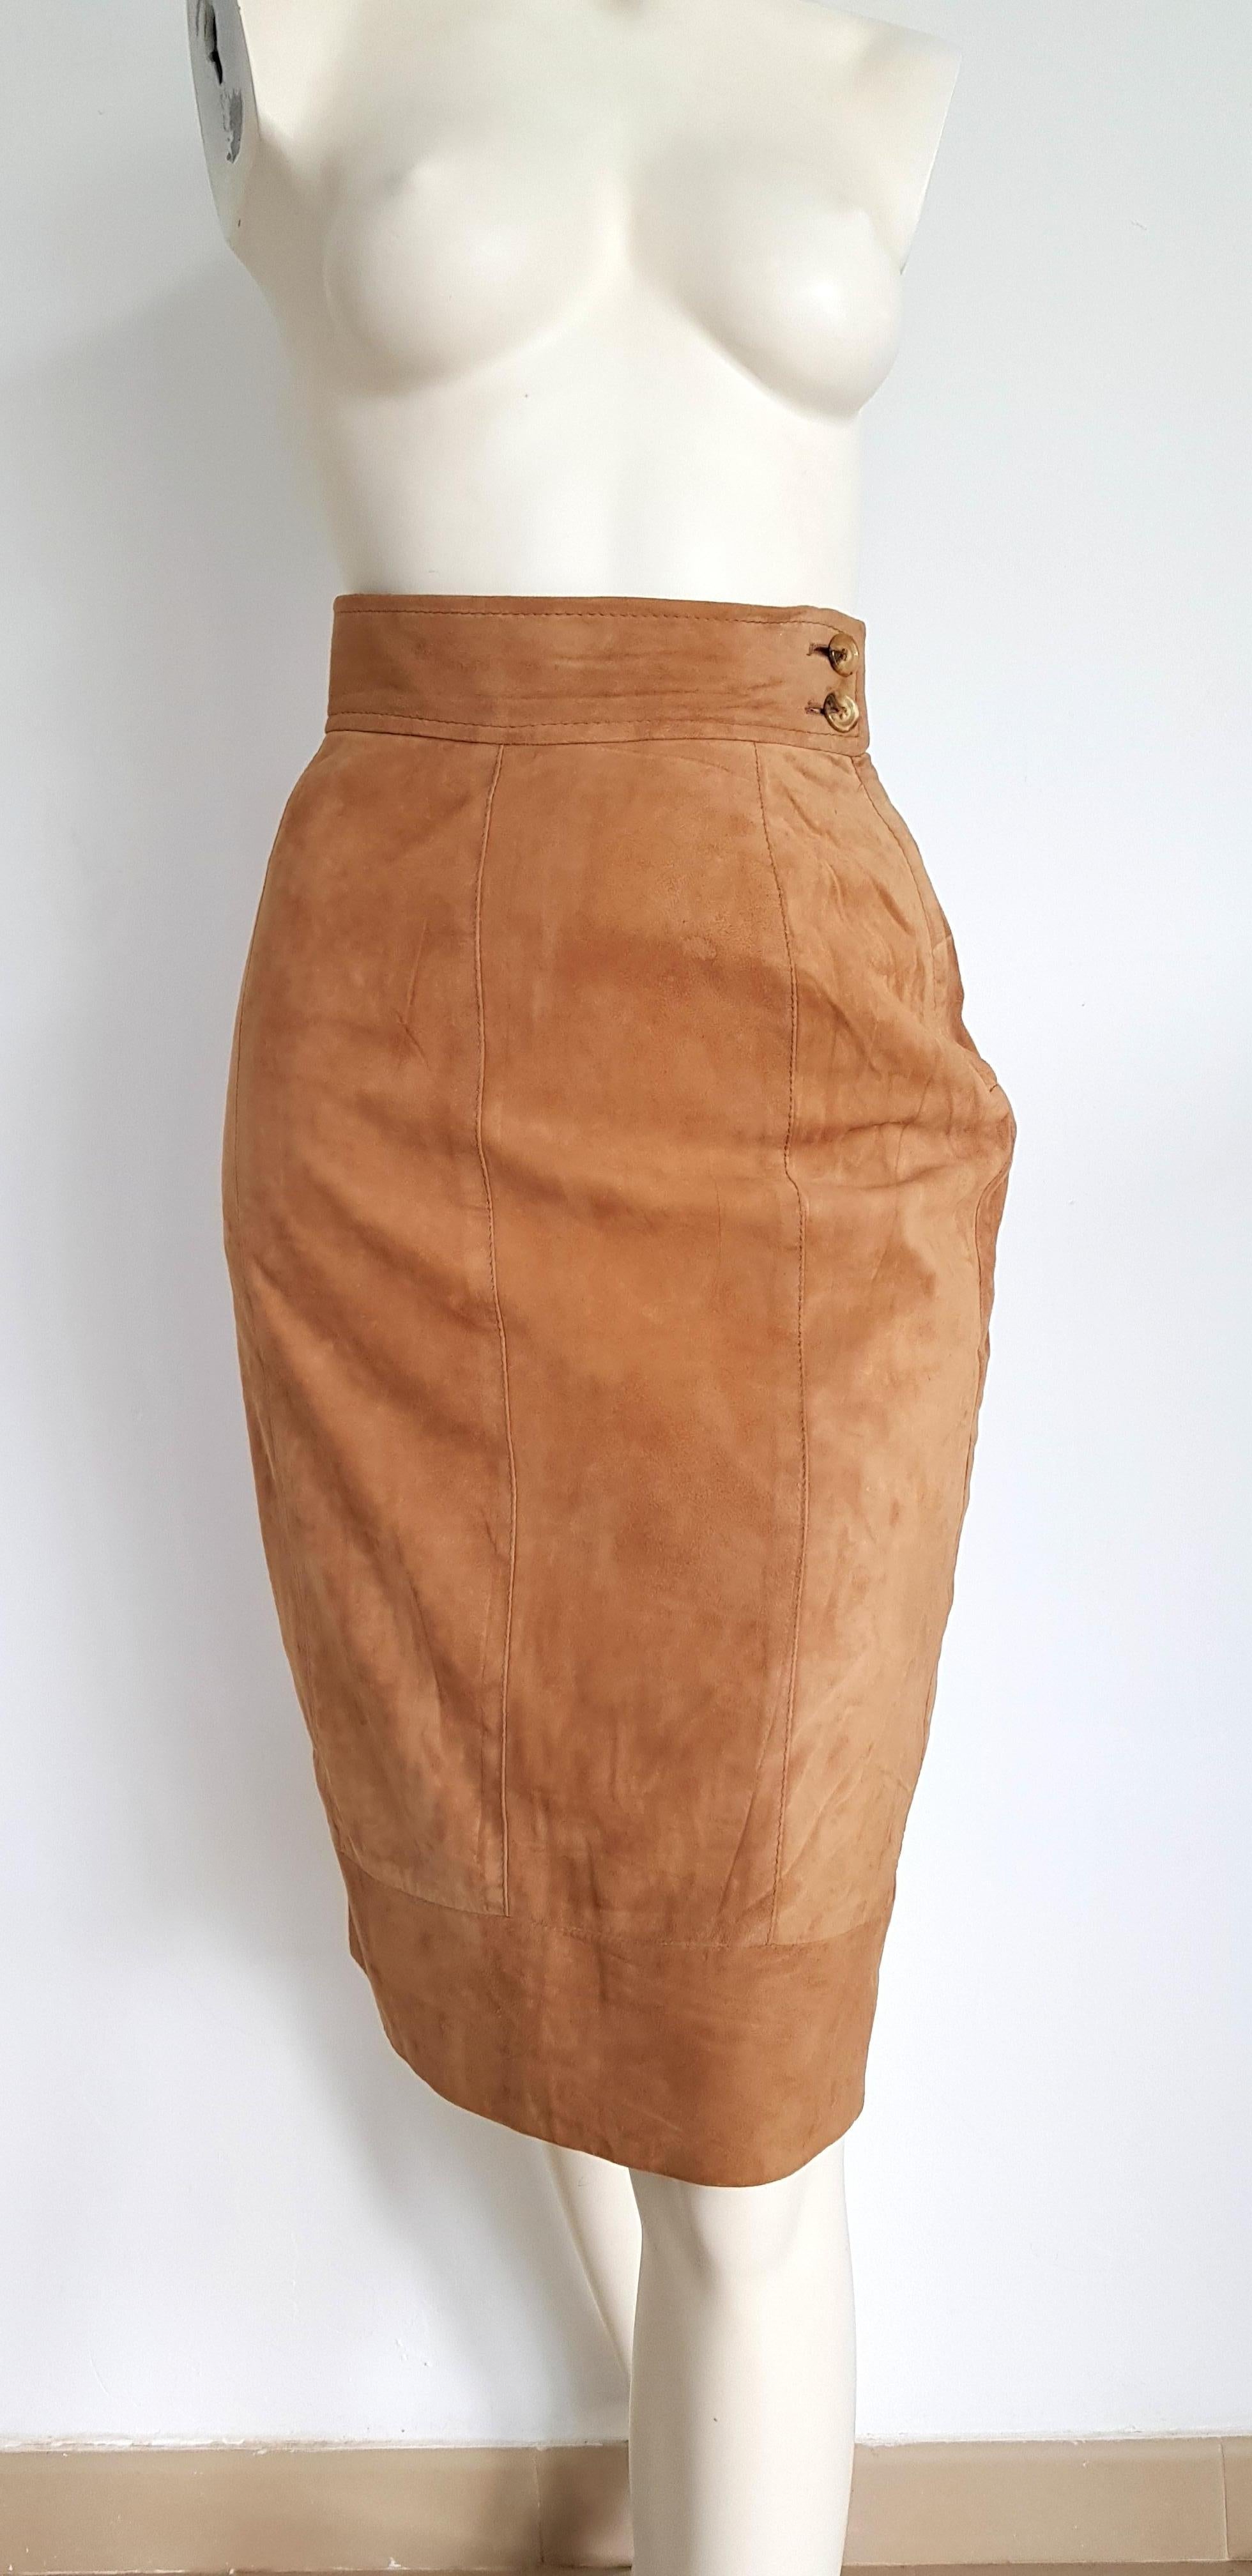 FERRÉ light brown suede skirt - Unworn, New.

SIZE: equivalent to about Small / Medium, please review approx measurements as follows in cm: lenght 68, waist circumference 67, hip circumference 96. 
TO CONVERT: cm x 0.39 = inch.
Measurements provided